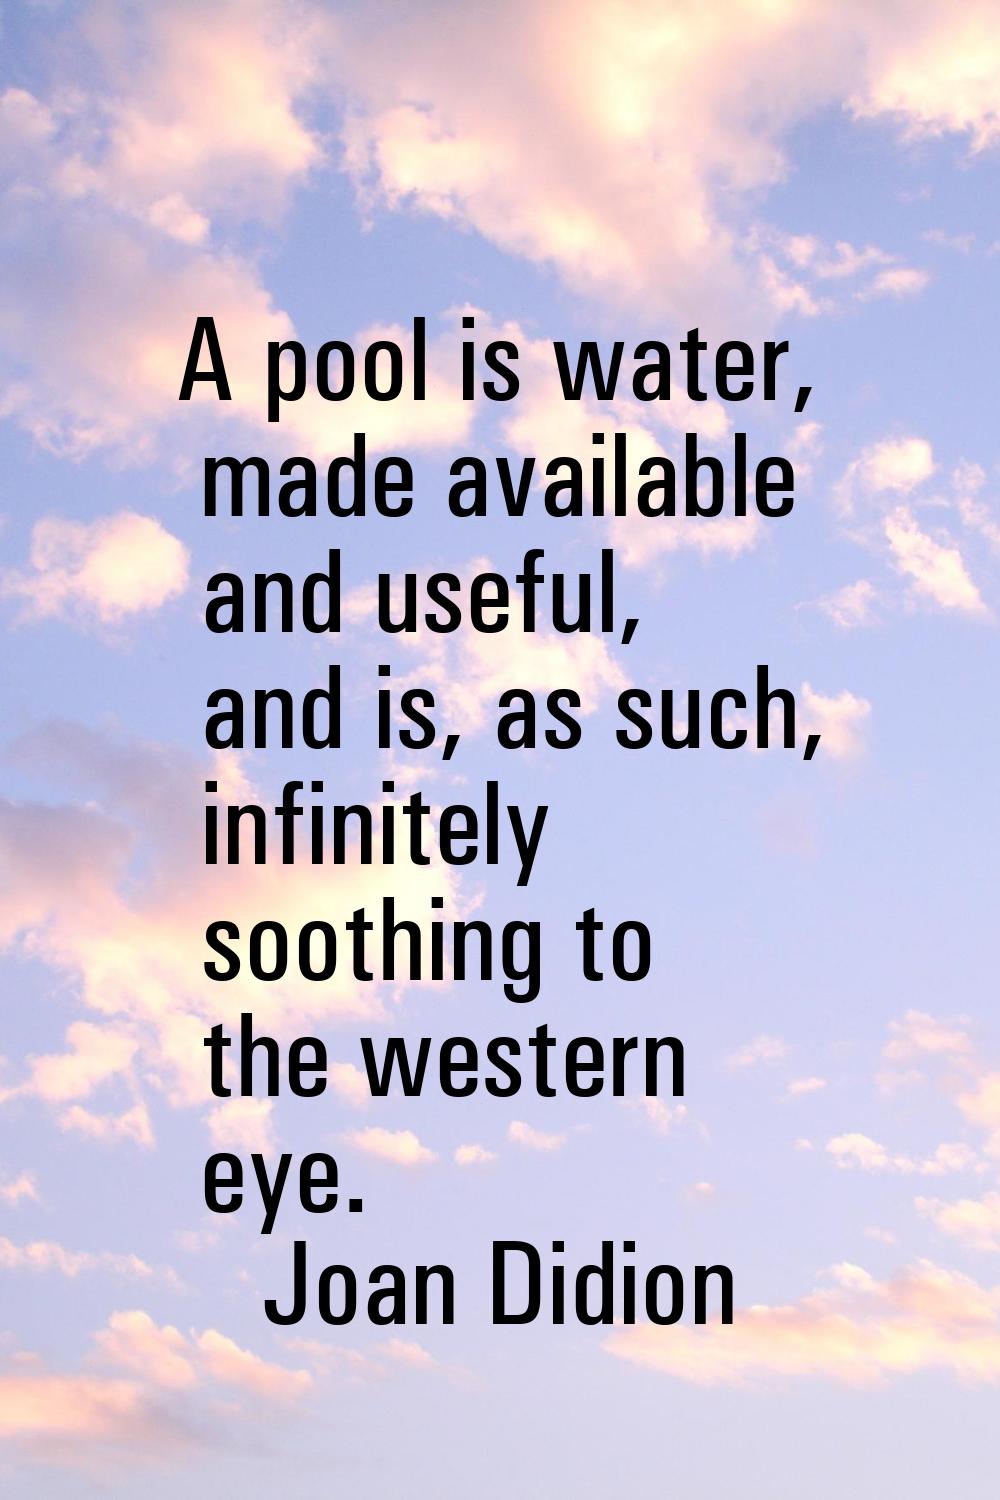 A pool is water, made available and useful, and is, as such, infinitely soothing to the western eye